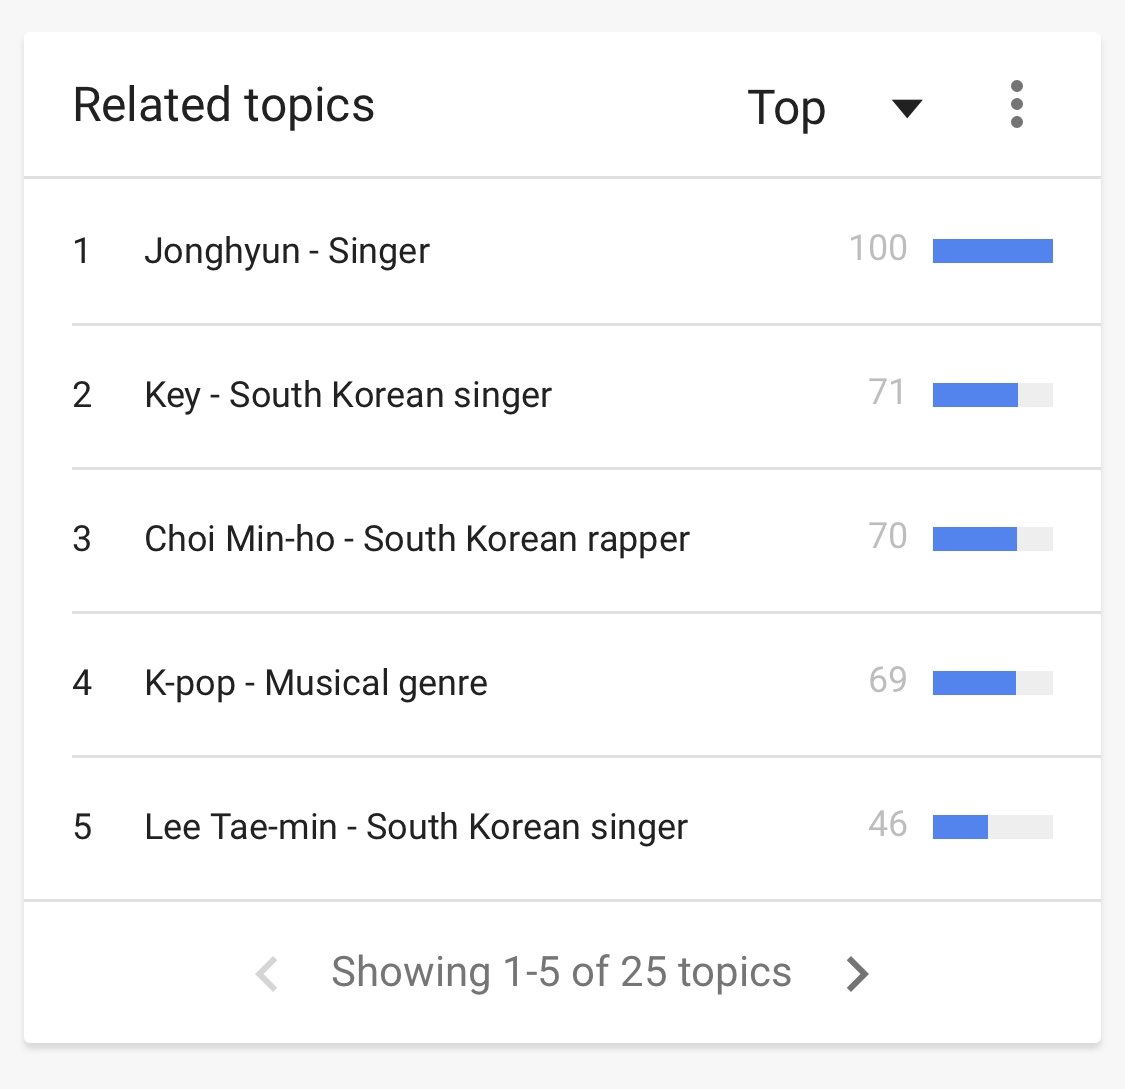 In the top related topics for both groups you actually have the members of respected groups. This is most likely fan searches which would be consistent over time. If you see non-member searches SHINee’s is Kpop and B*S’ is “album” so again we can see consumer habits are different